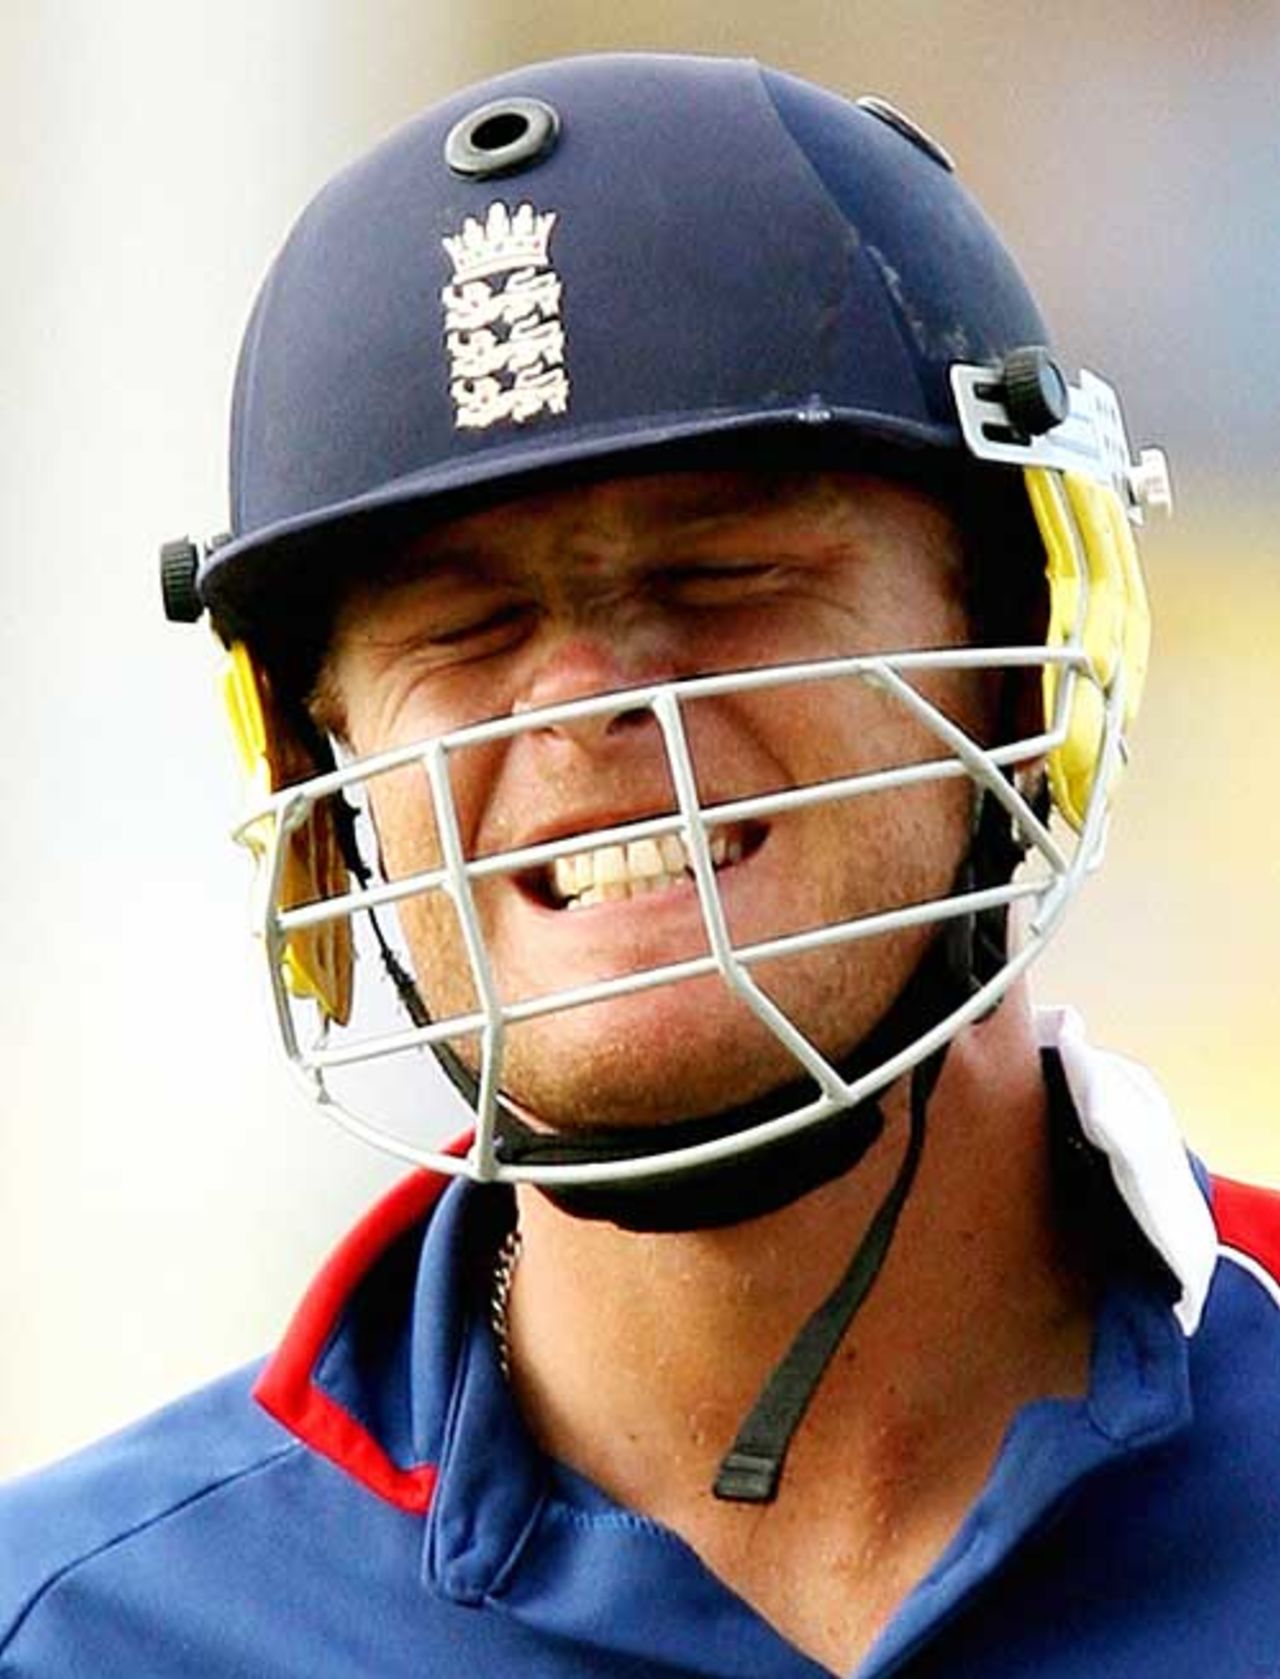 Andrew Flintoff feels the pain after falling for 2, England v Sri Lanka, Super Eights, Antigua, April 4, 2007